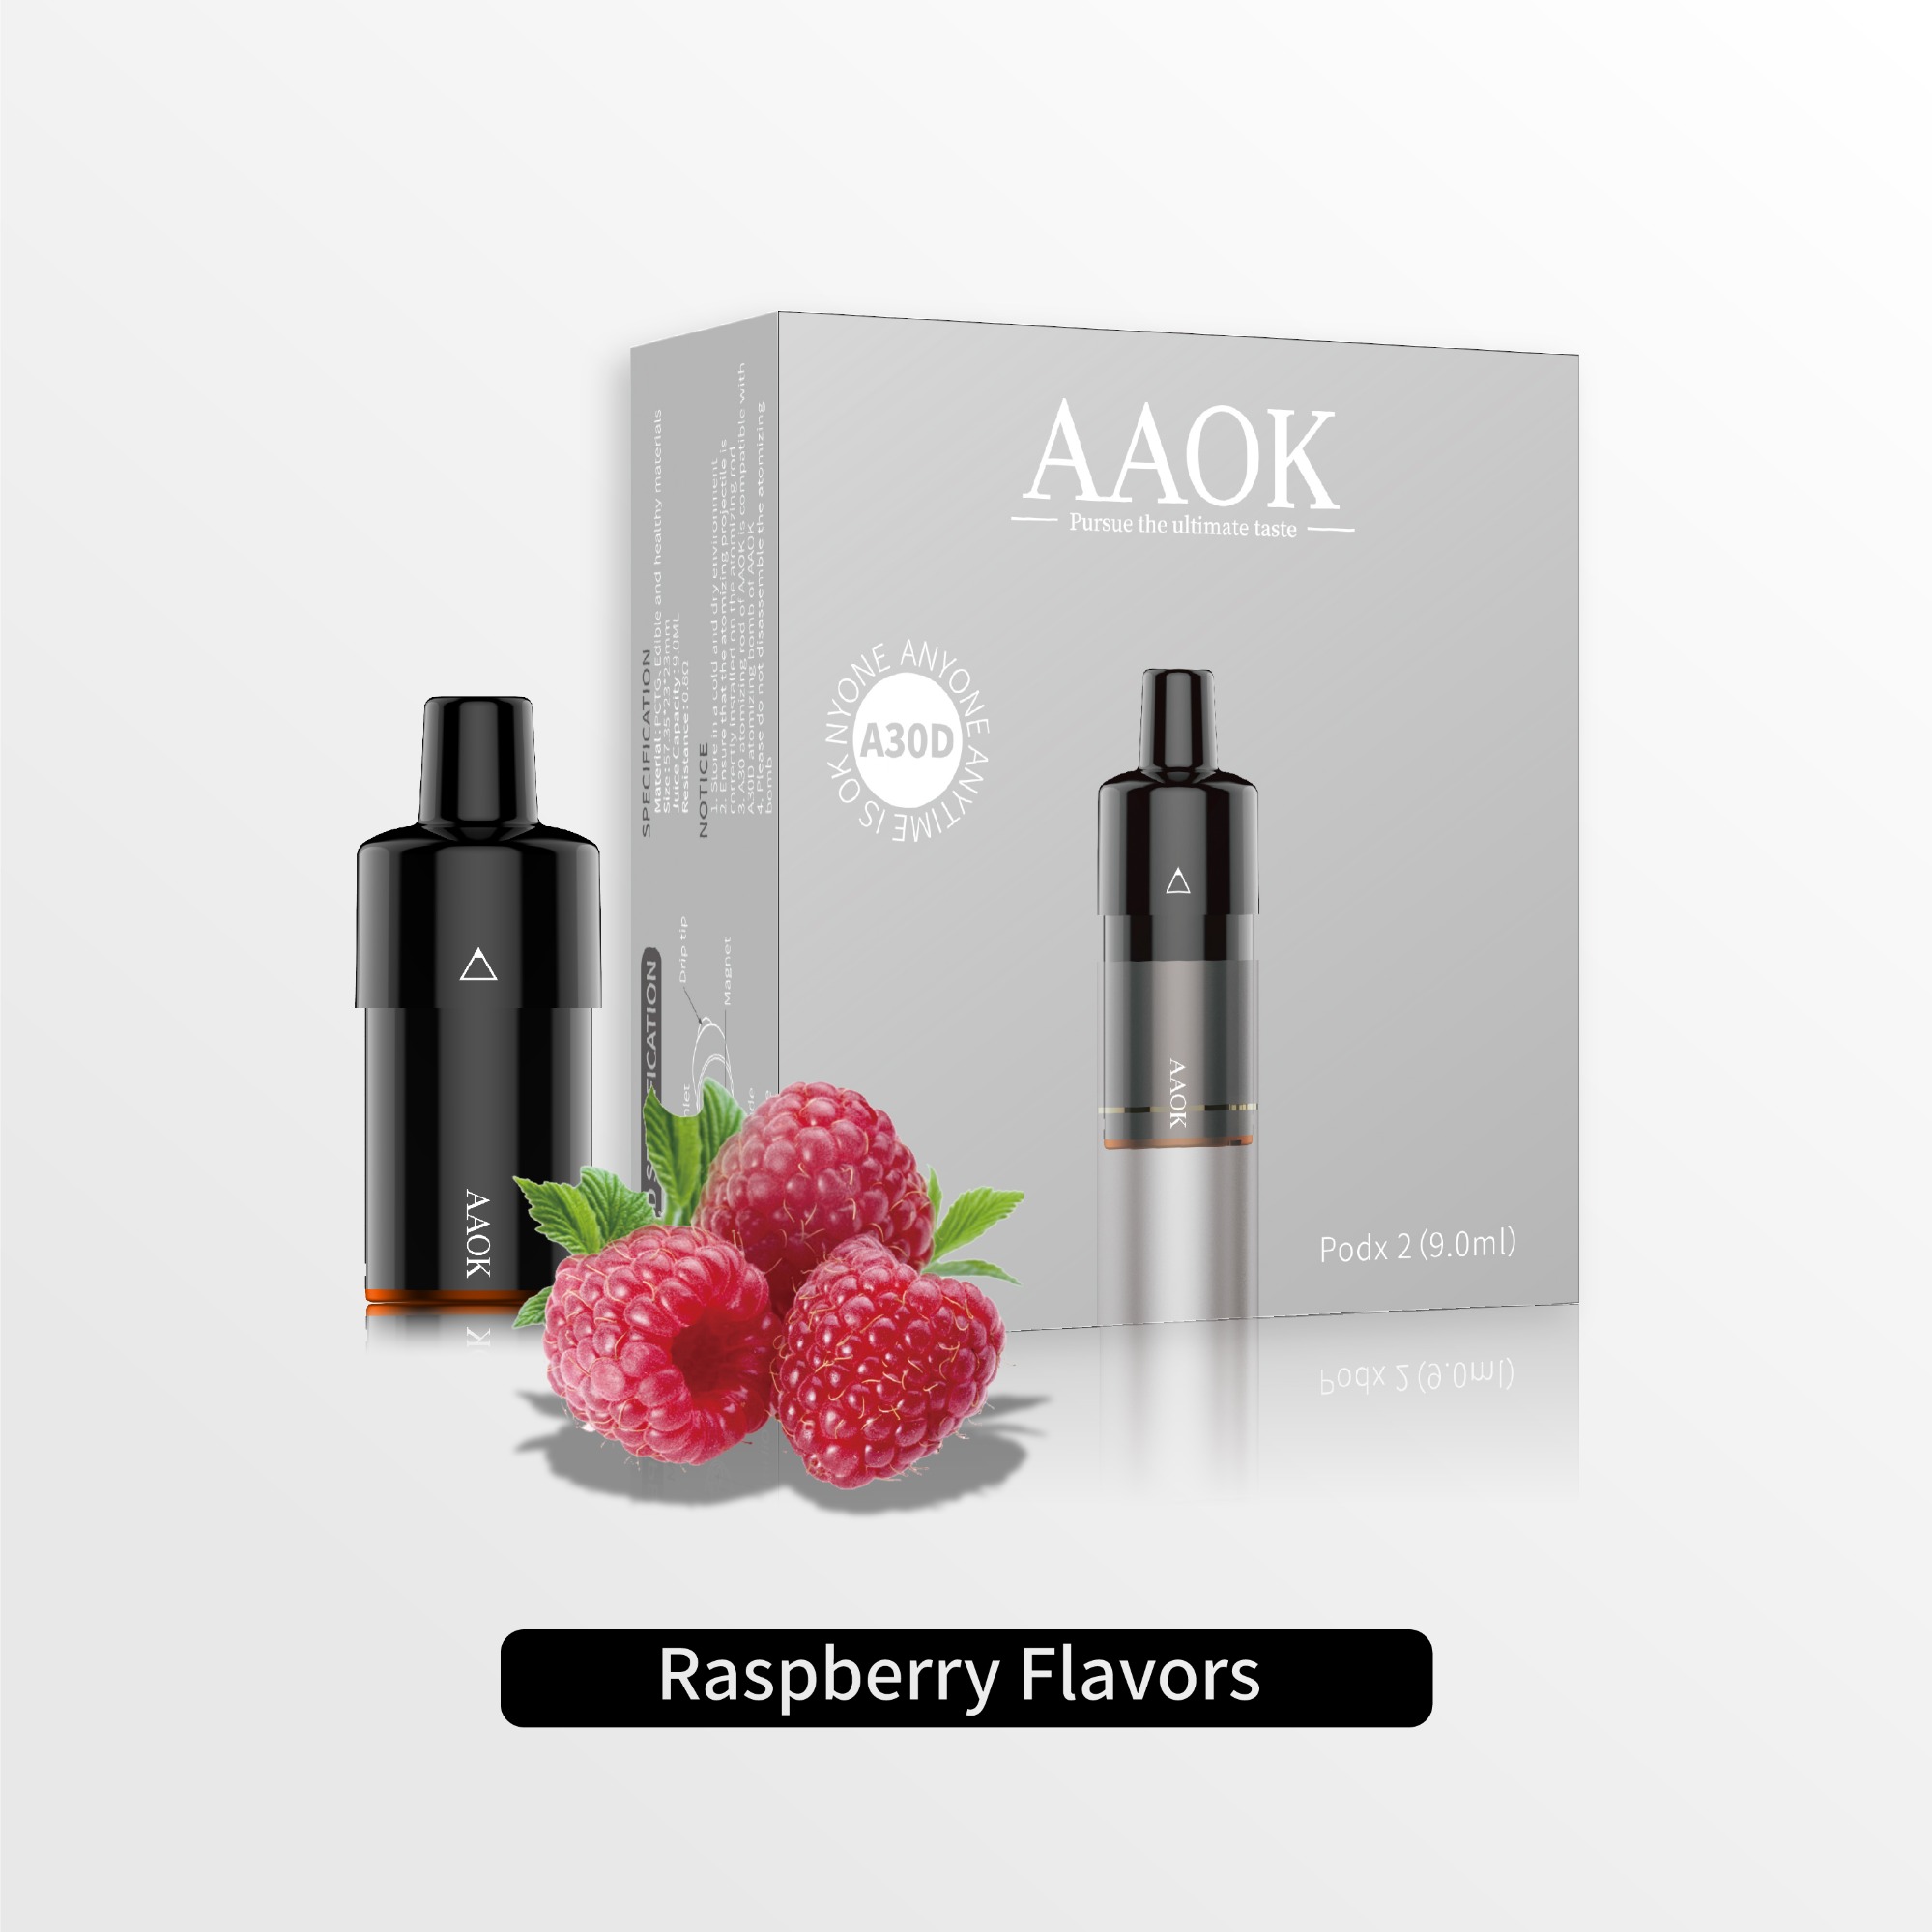 AAOK A30D Brazil Wildberry 8ml Refillable Electronic Cigarette Cartridge